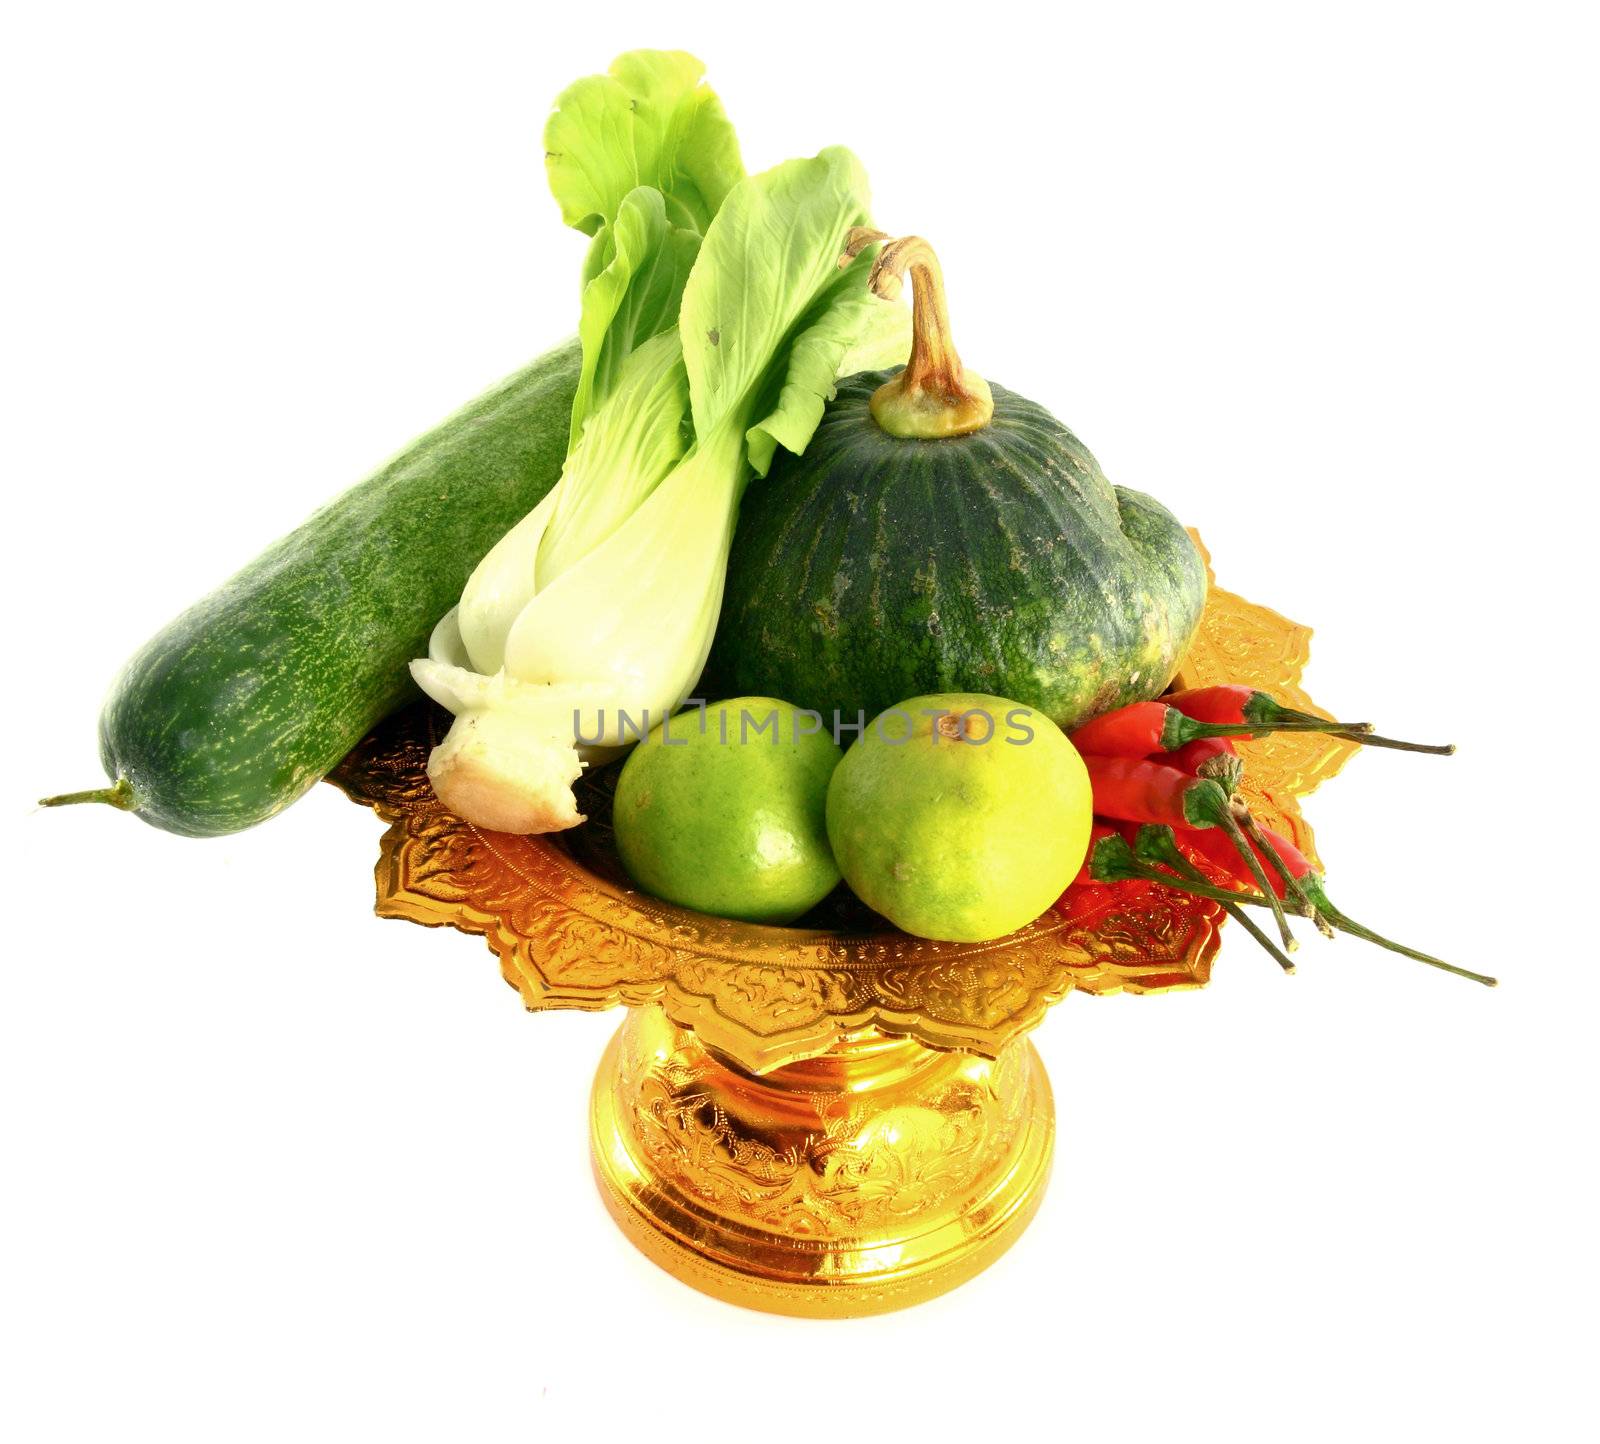 Vegetables mix on golden tray on white background by geargodz